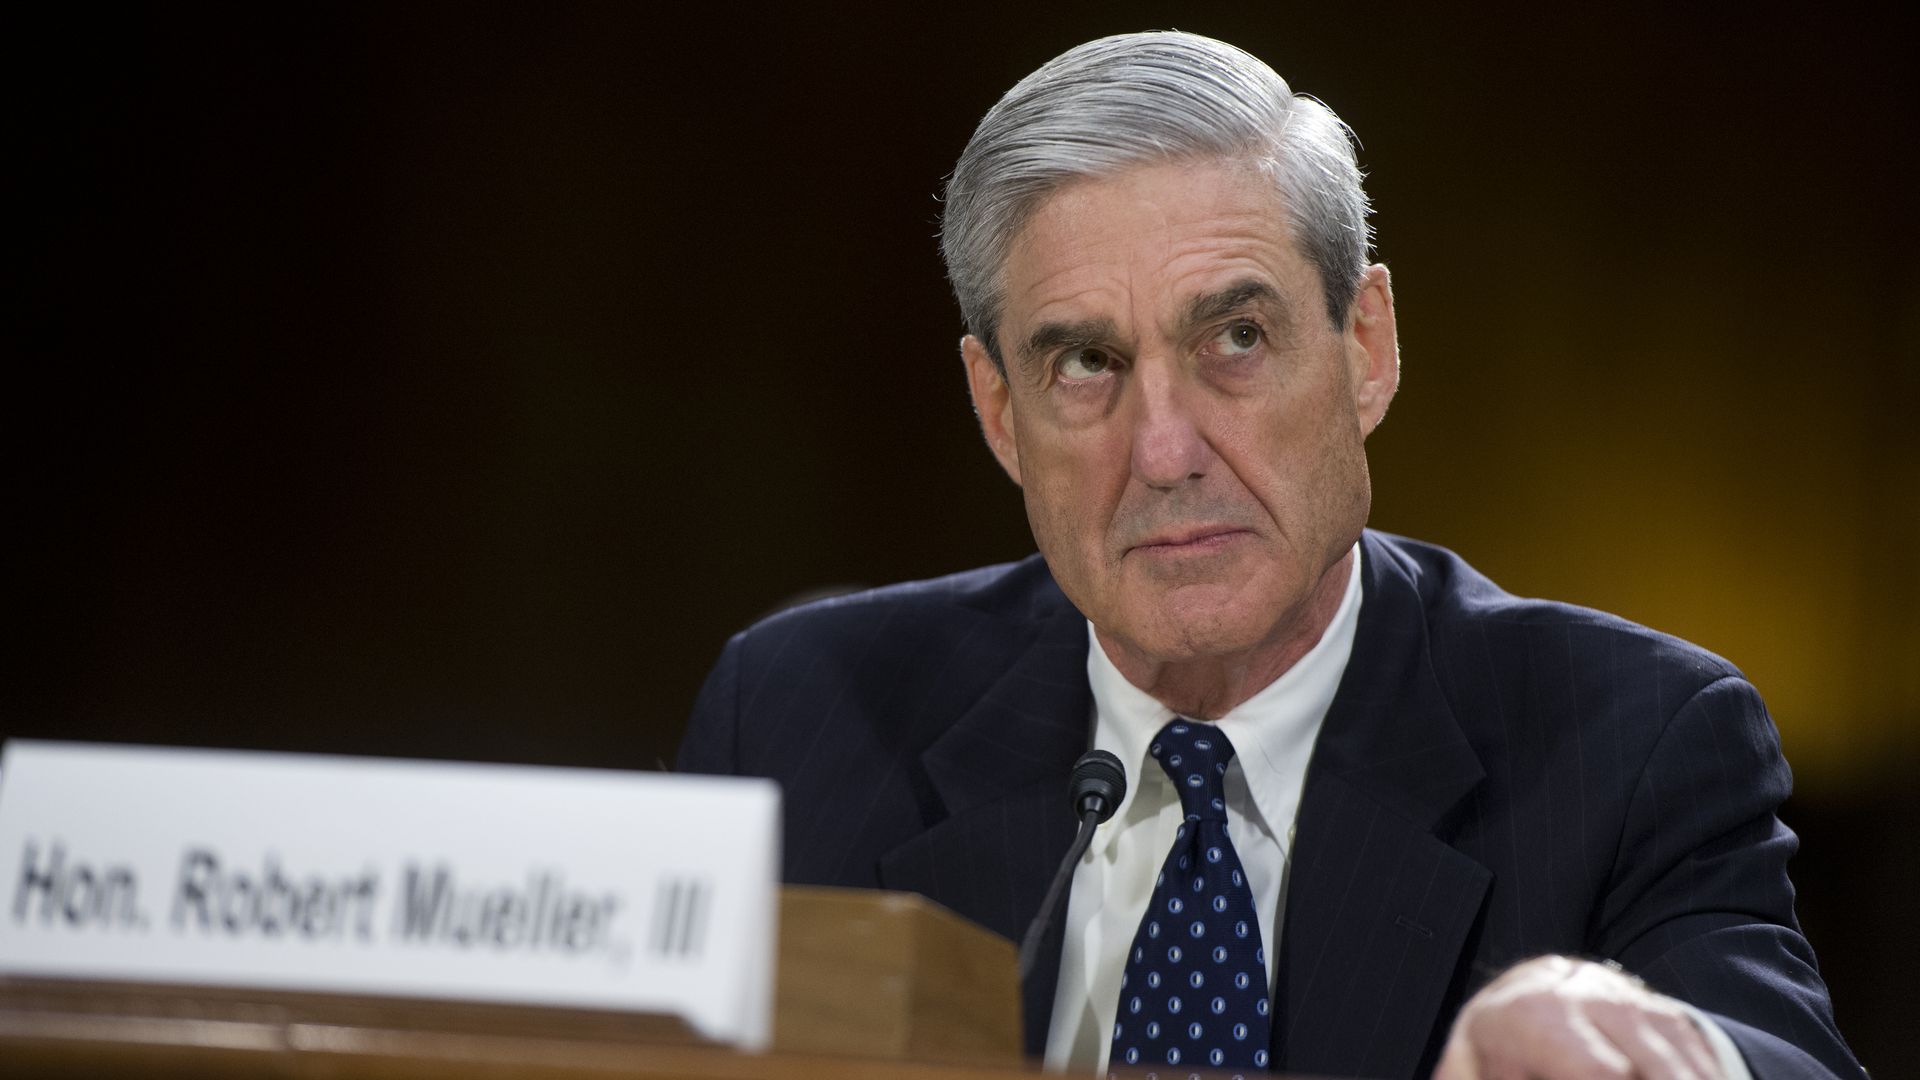 Special Counsel Robert Mueller's Russia investigation looks close to wrapping up.